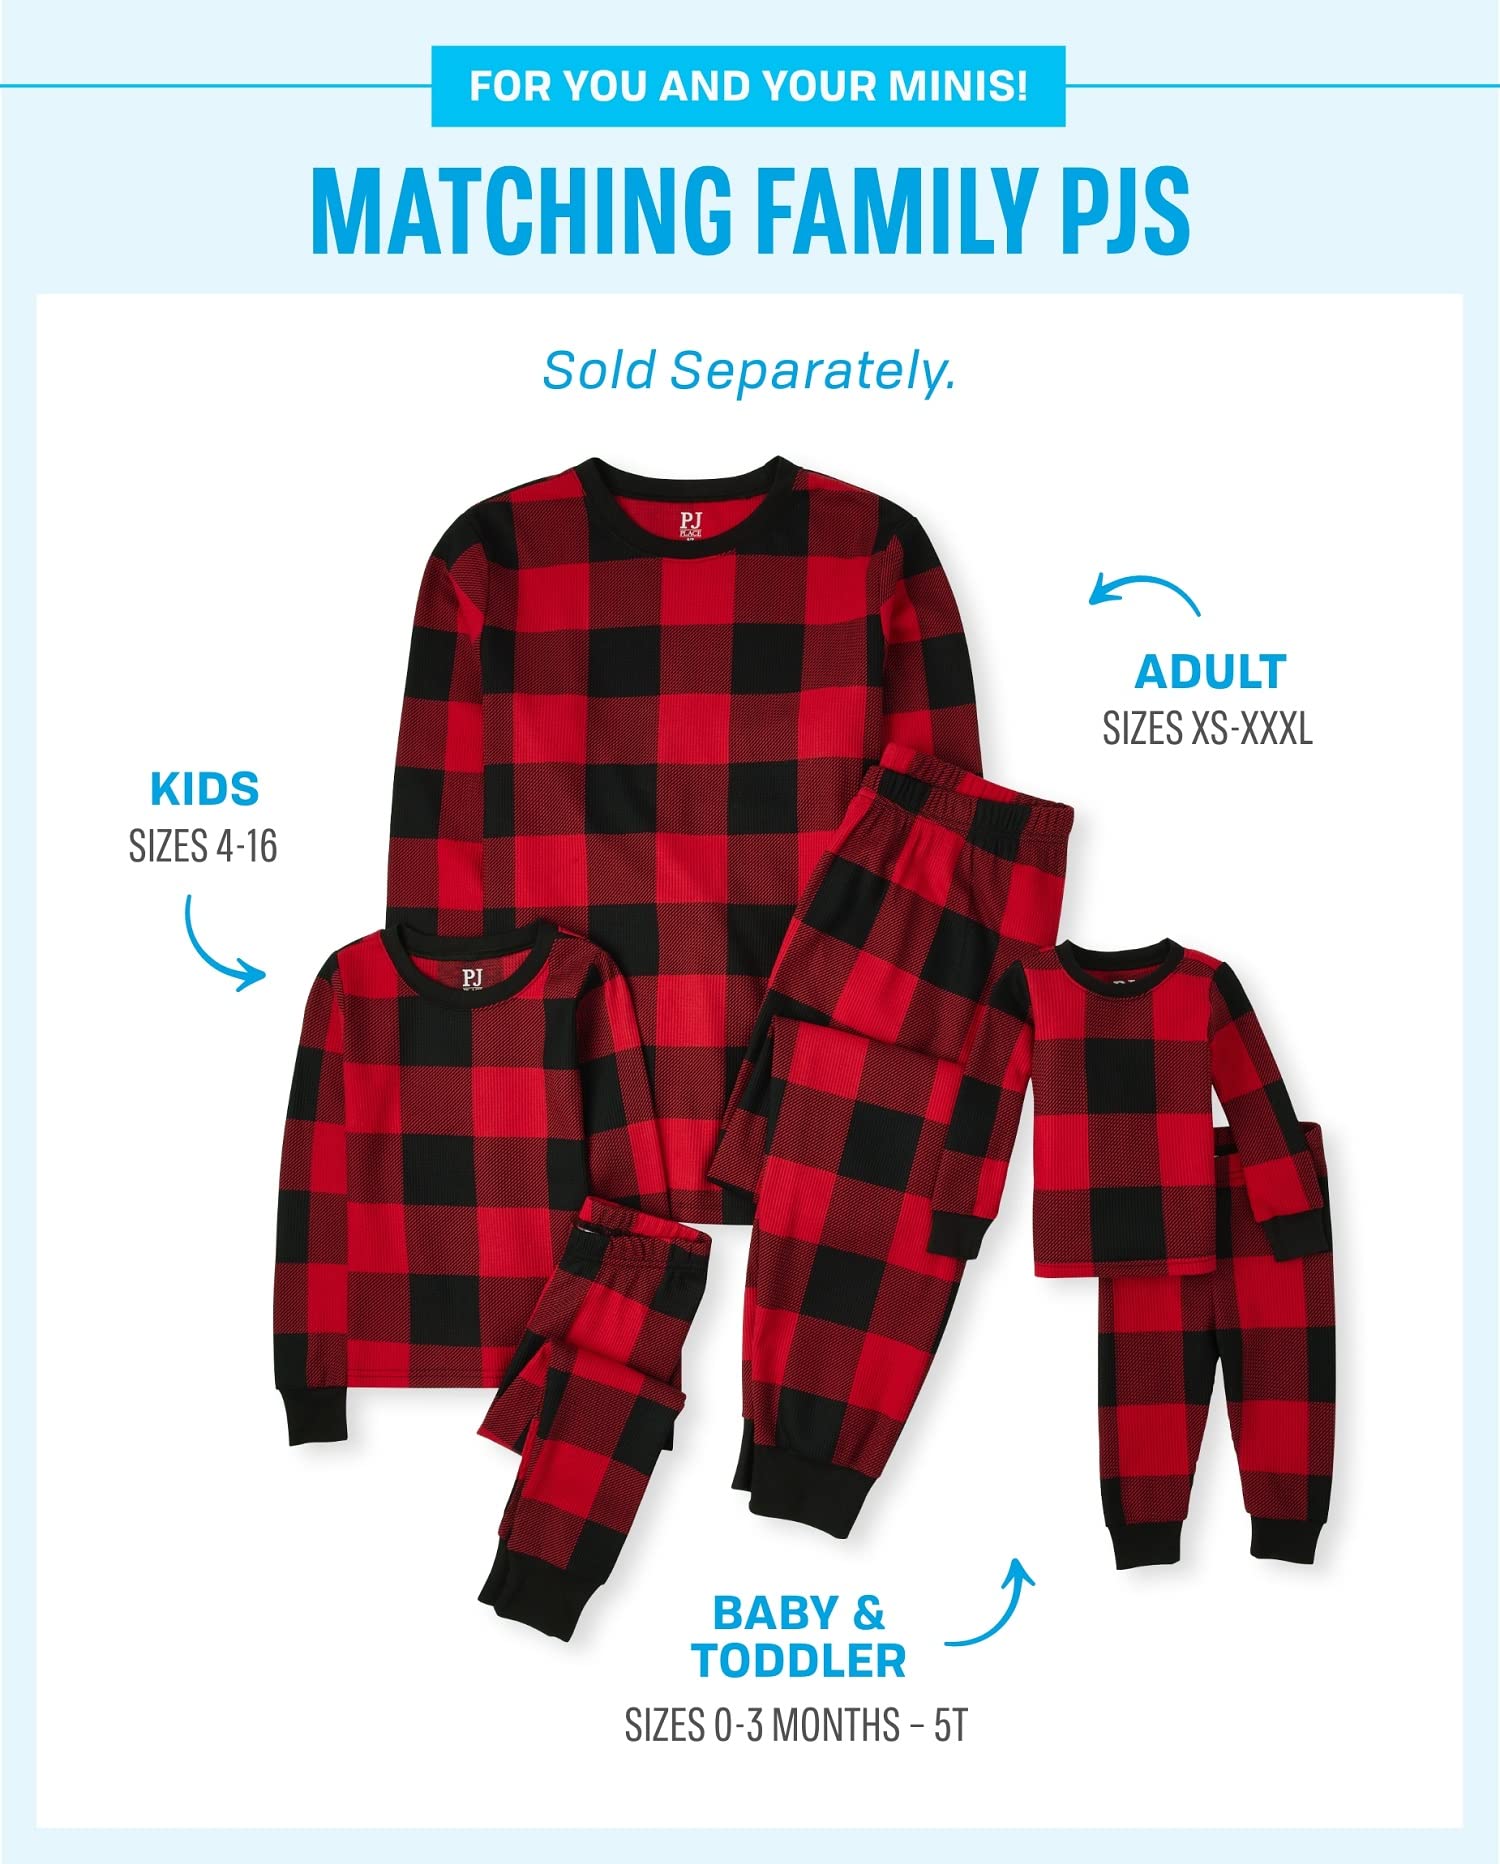 The Children's Place Kids 2 Piece Family Matching, Festive Christmas Pajama Sets, Cotton, Red/Black, 6